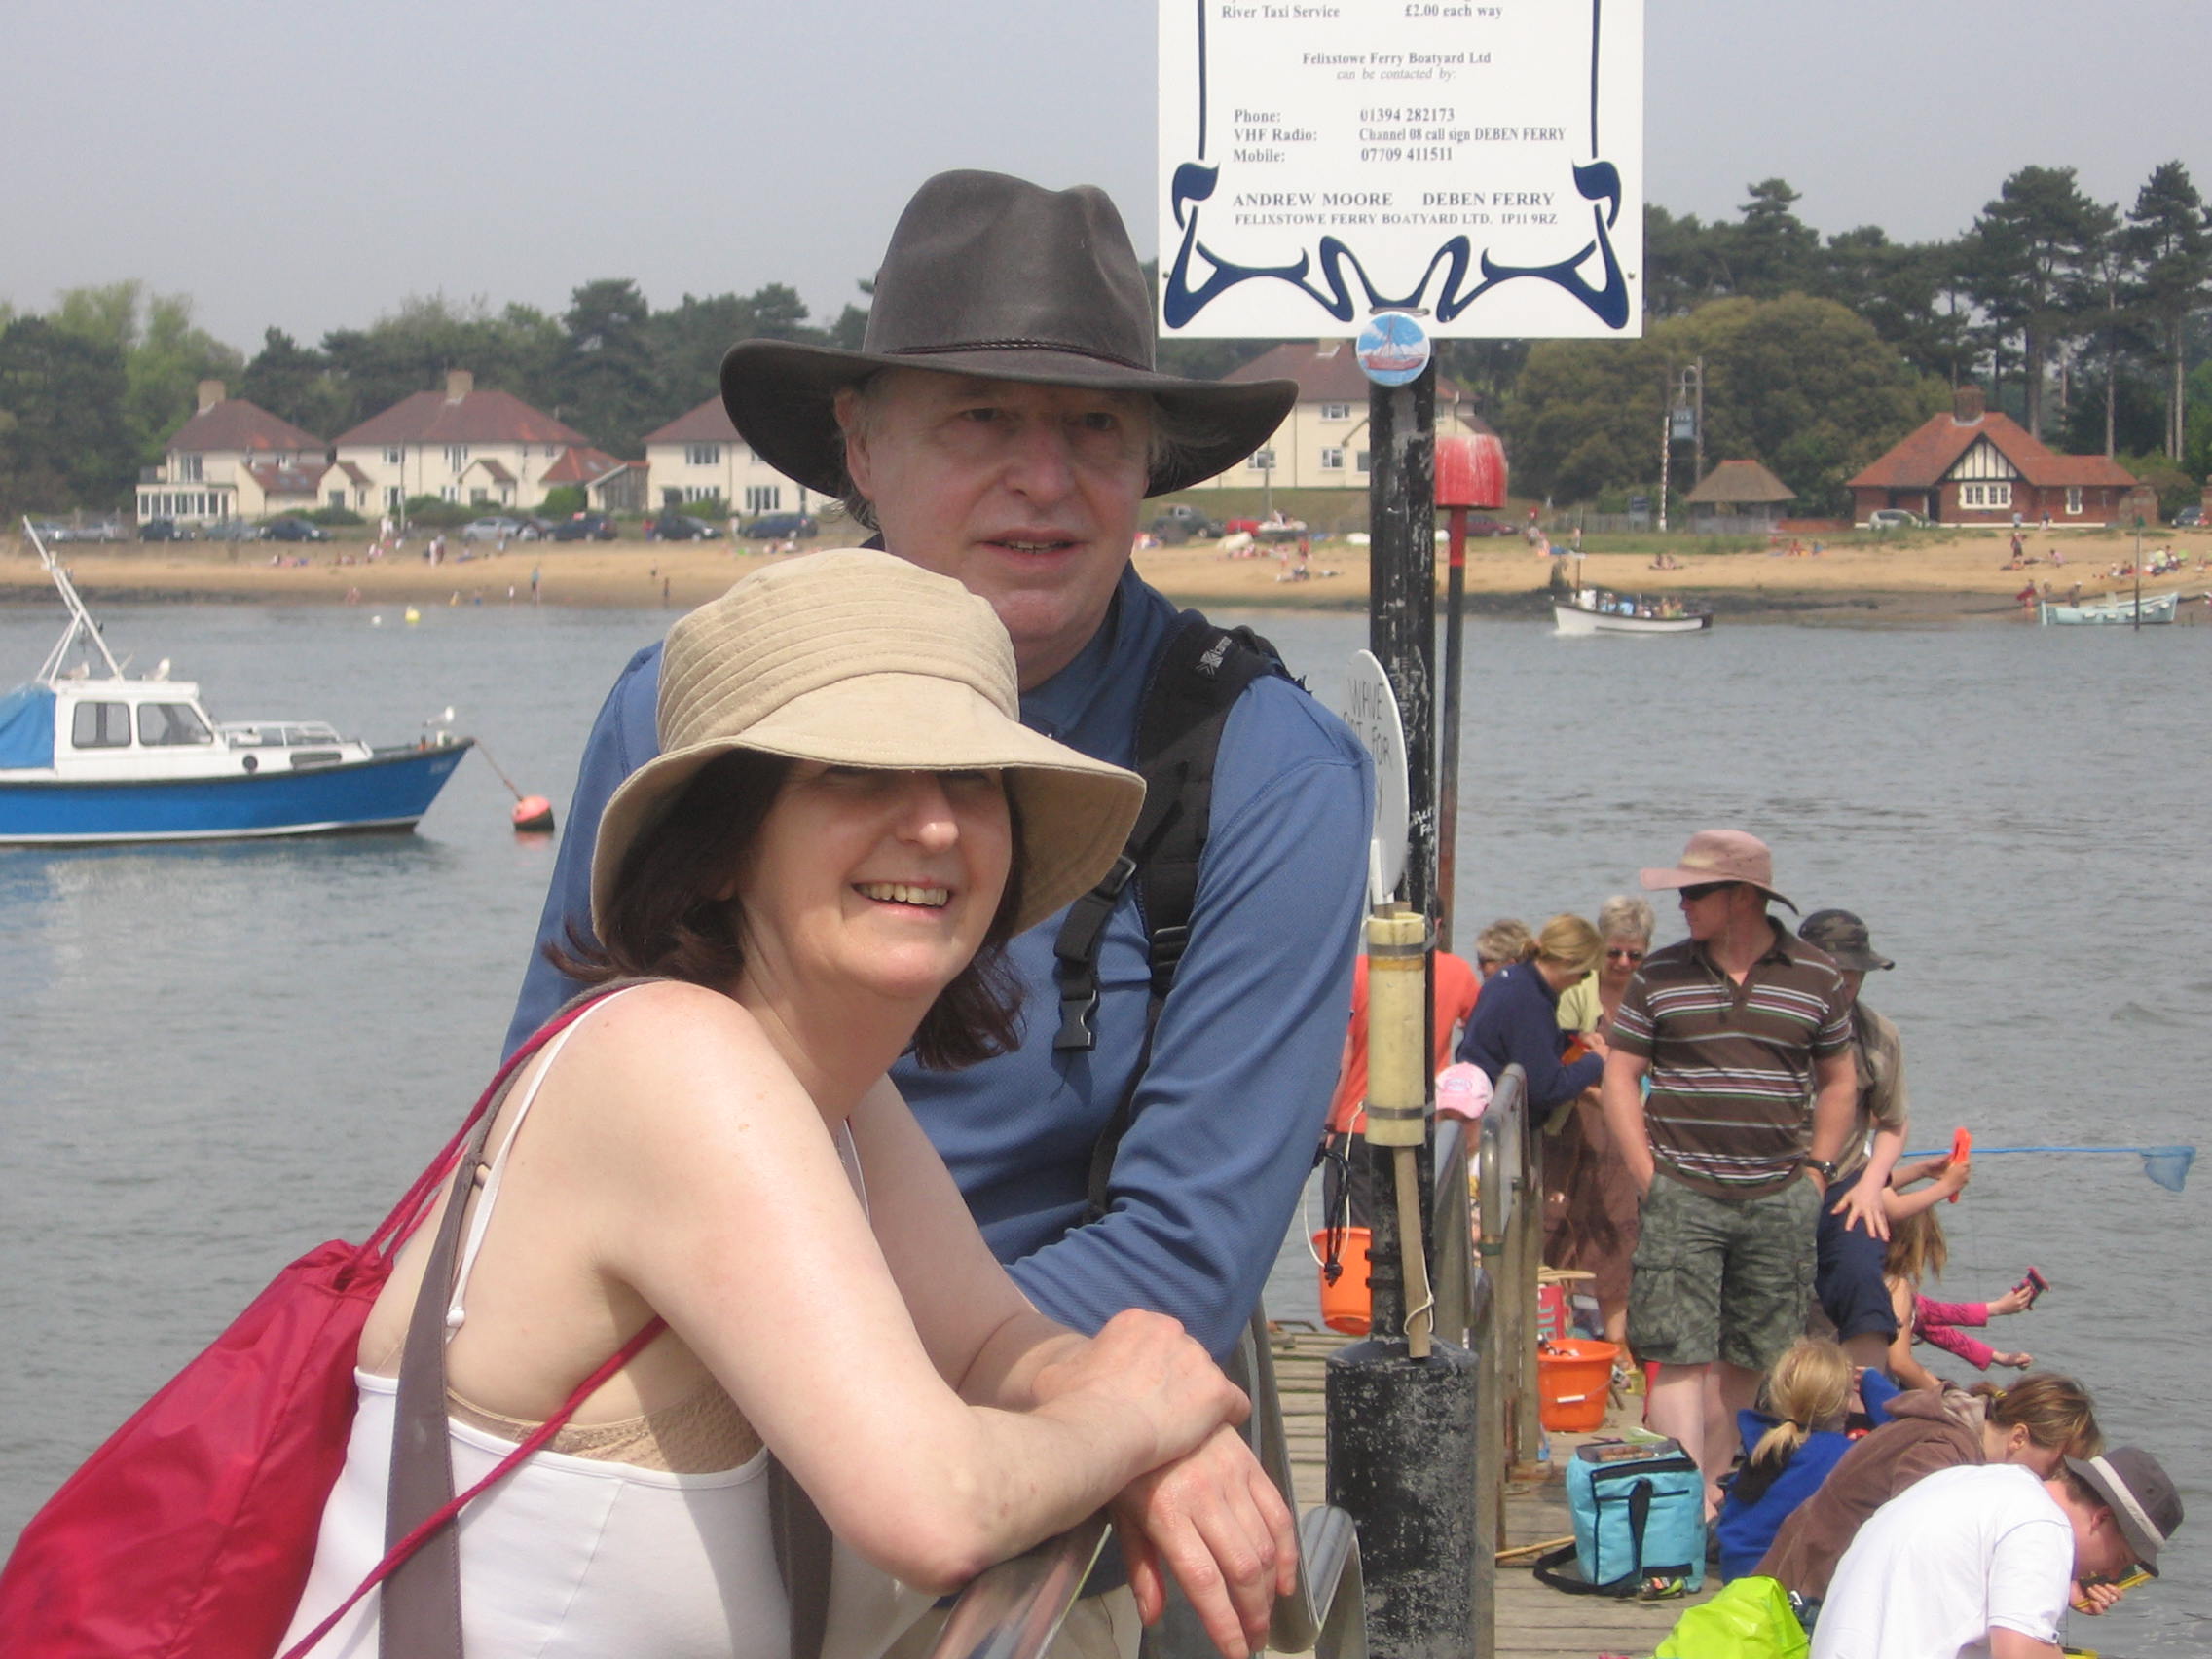 Richard with Jane on ferry at Deben in East Anglia